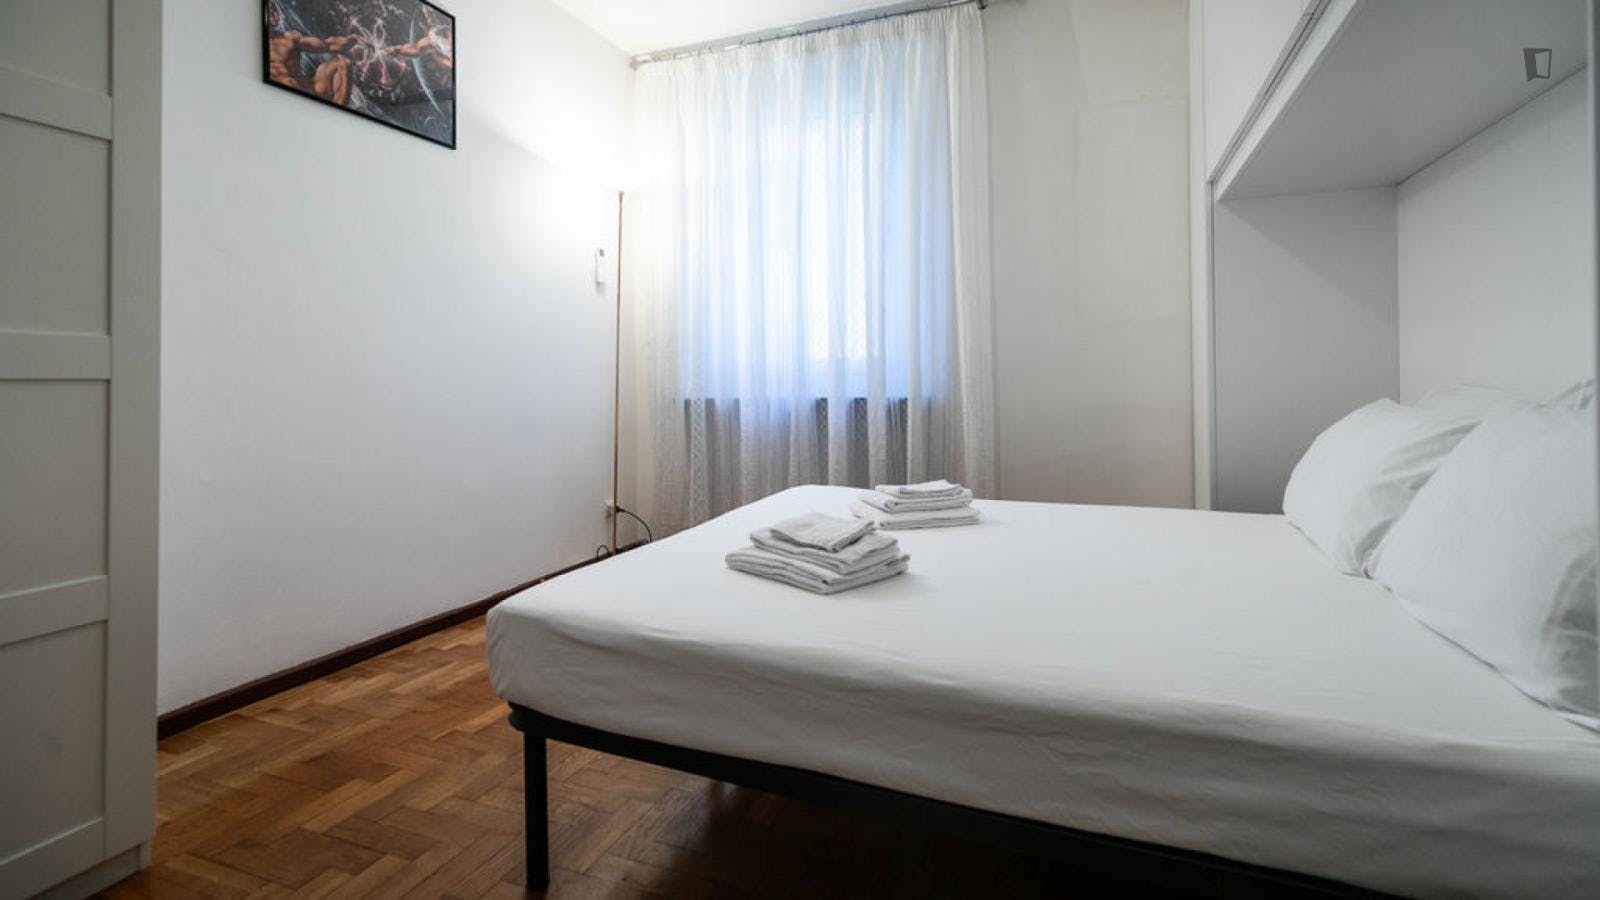 Very pleasant 1-bedroom flat in the centre of Udine